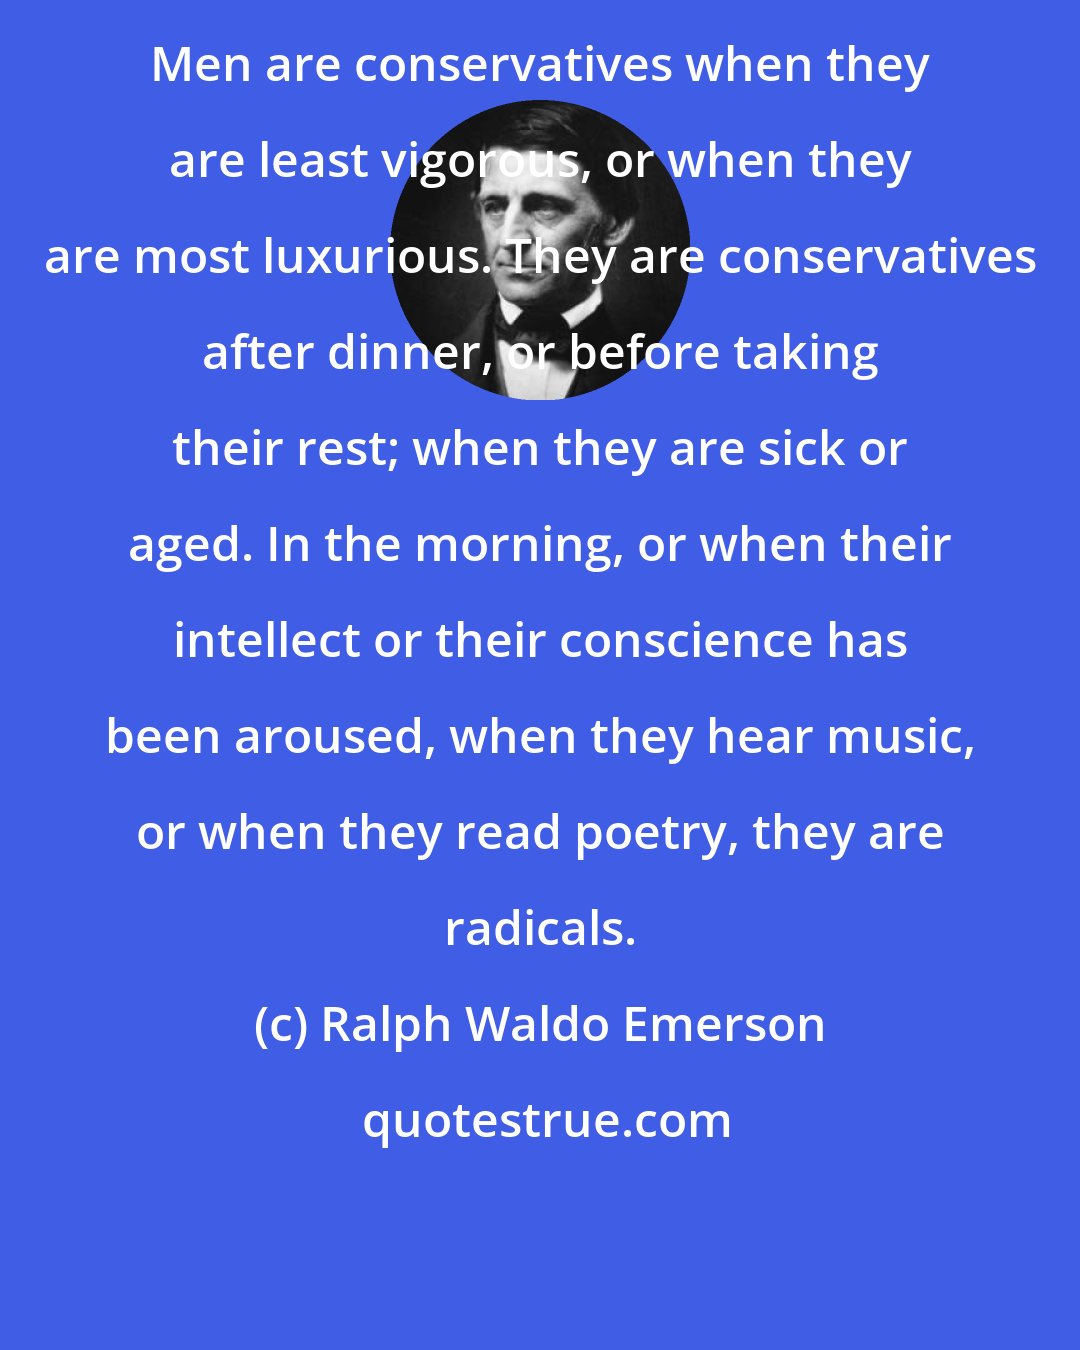 Ralph Waldo Emerson: Men are conservatives when they are least vigorous, or when they are most luxurious. They are conservatives after dinner, or before taking their rest; when they are sick or aged. In the morning, or when their intellect or their conscience has been aroused, when they hear music, or when they read poetry, they are radicals.